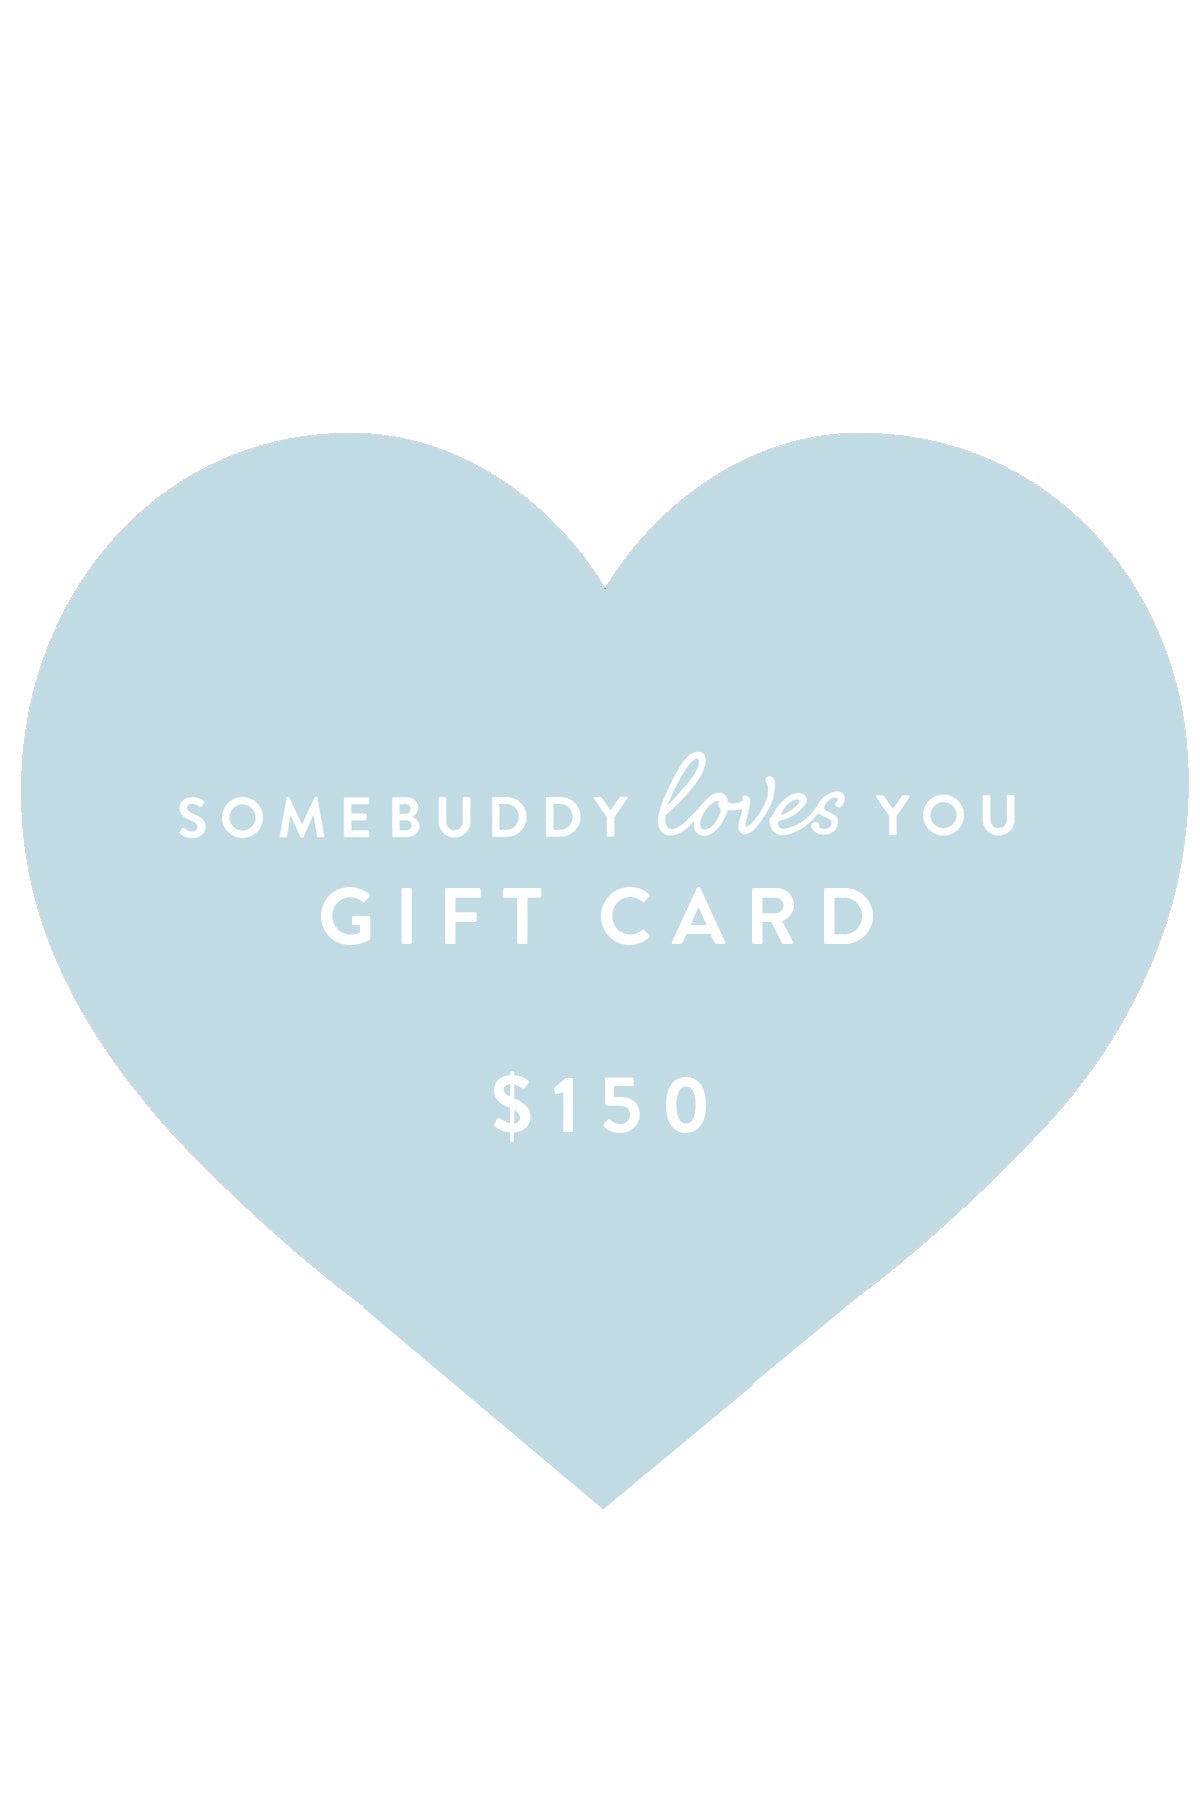 Somebuddy Loves You Gift Card $150